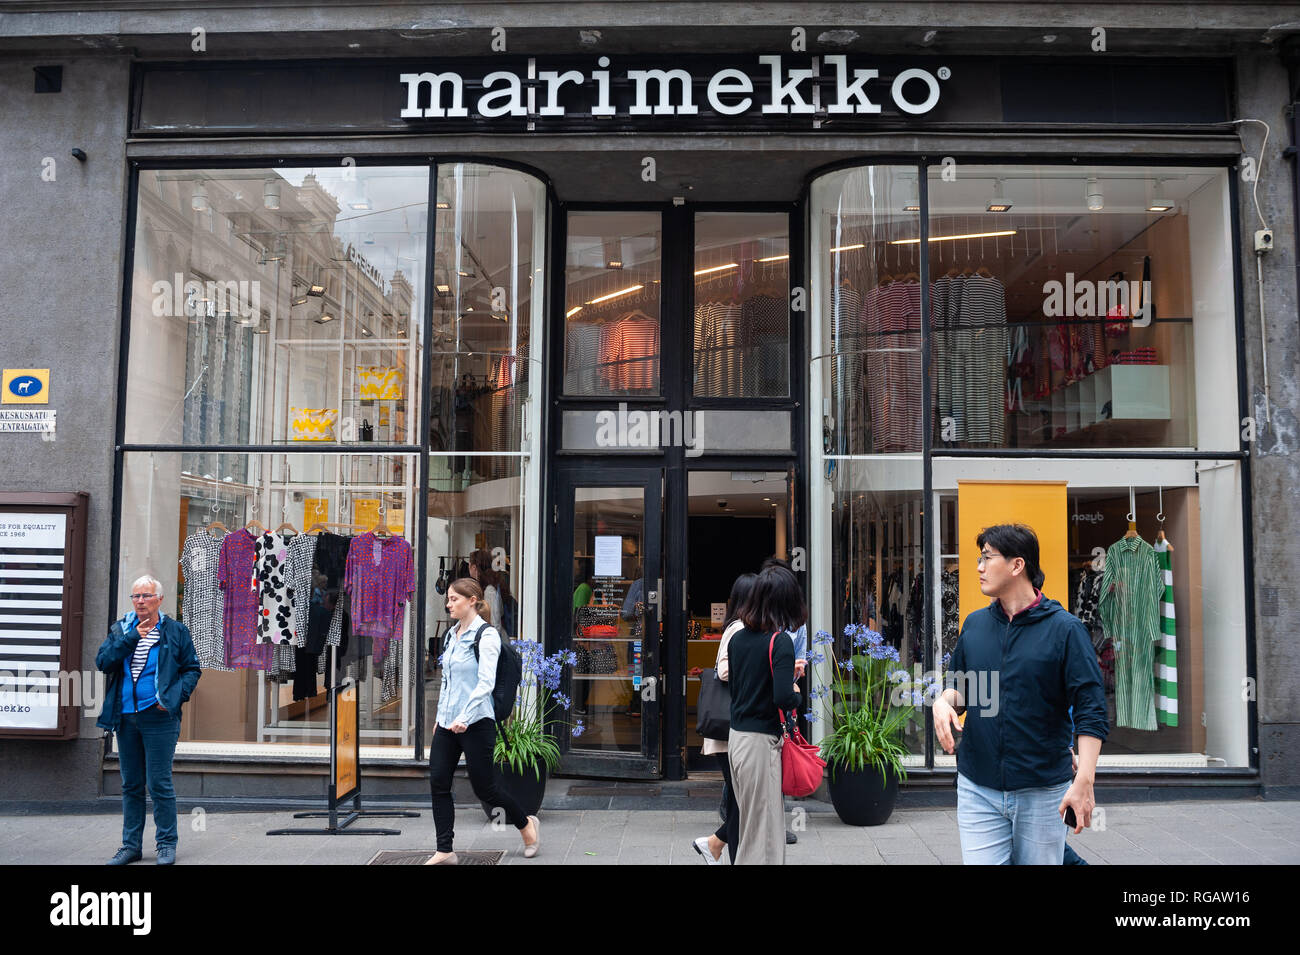 24.06.2018, Helsinki, Finland, Europe - Pedestrians are walking by a  Marimekko storefront in a pedestrian zone in the city centre Stock Photo -  Alamy